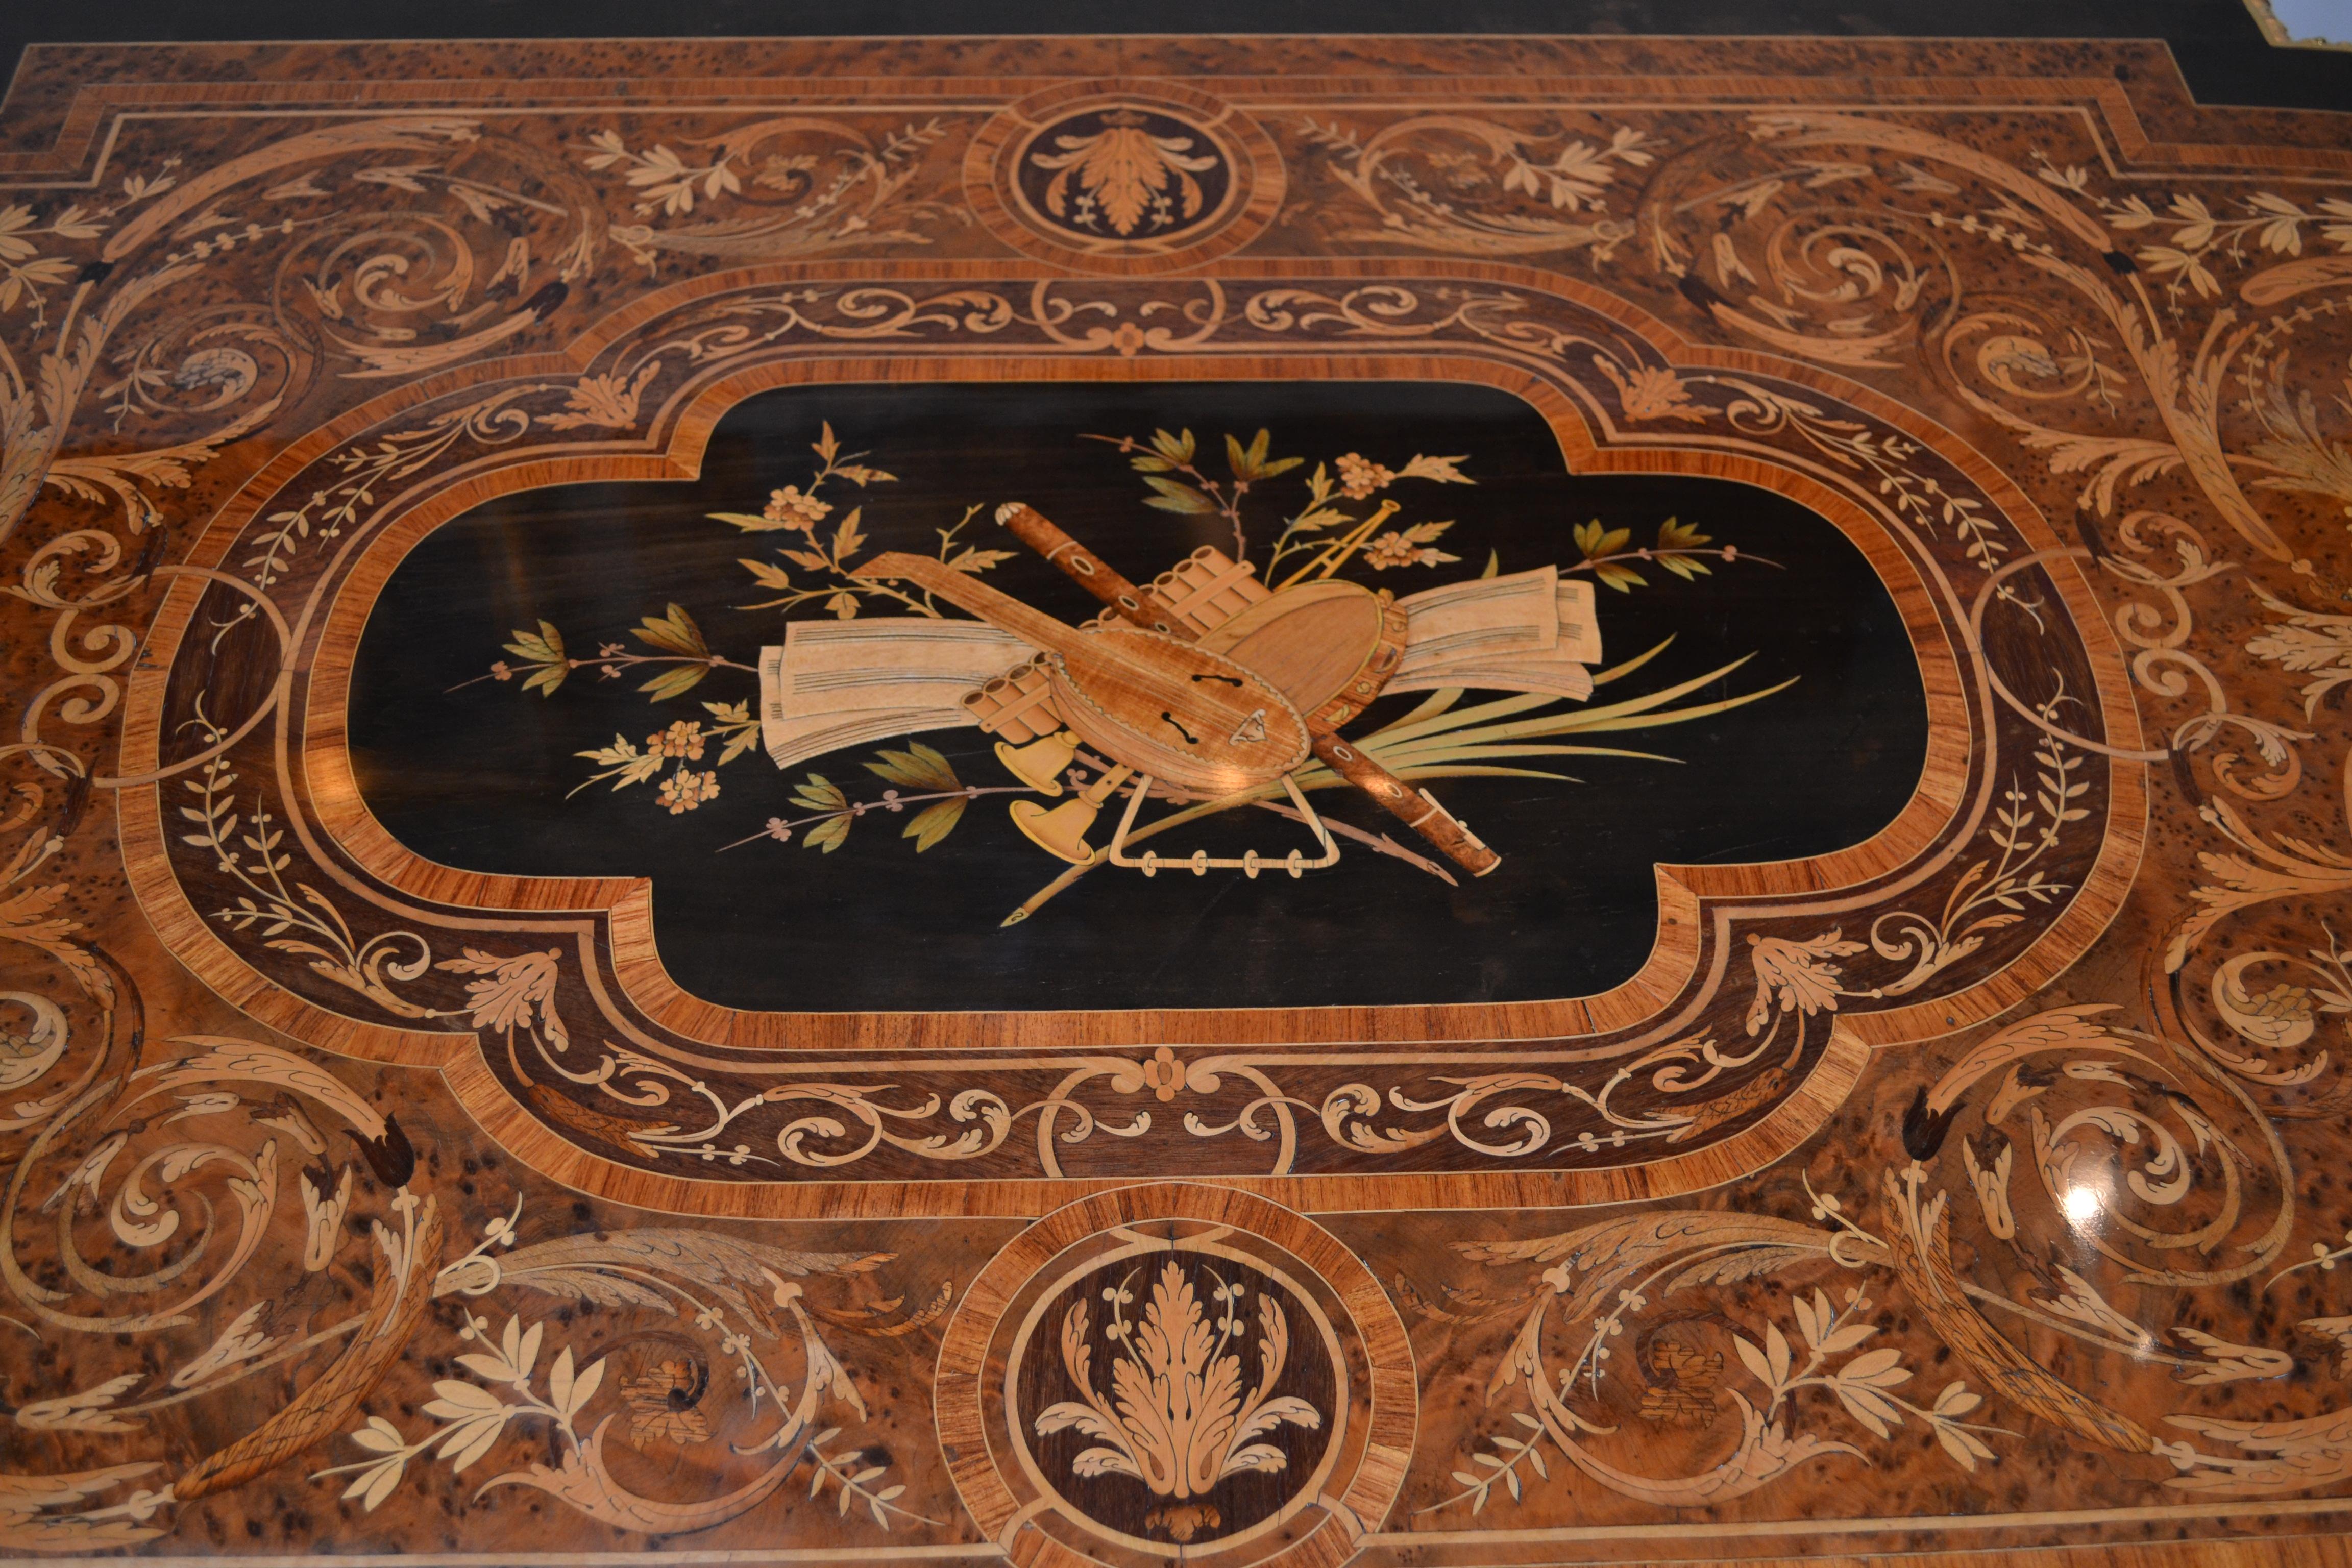 A French Napoleon III D ended table exedra shaped top richly inlaid with various wood species including burl wood kingwood satinwood and ebony centered with a large classic urn, birds nest and flowers. The entire top is edged with ormolu banding and